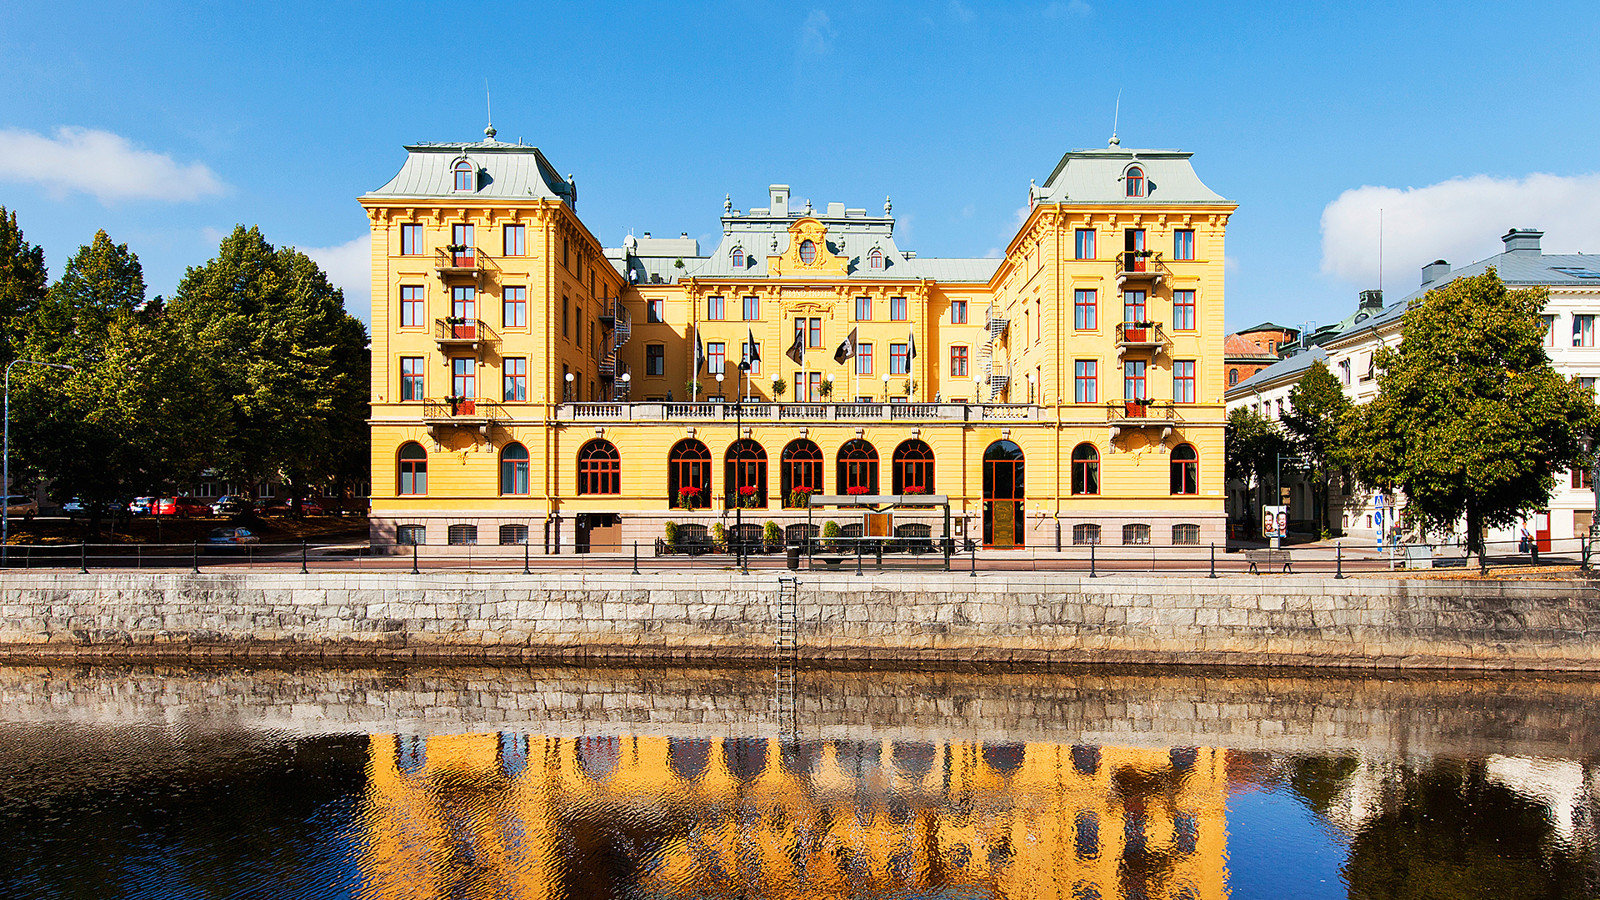 The yellow facade of the Elite Grand Hotel in Gävle